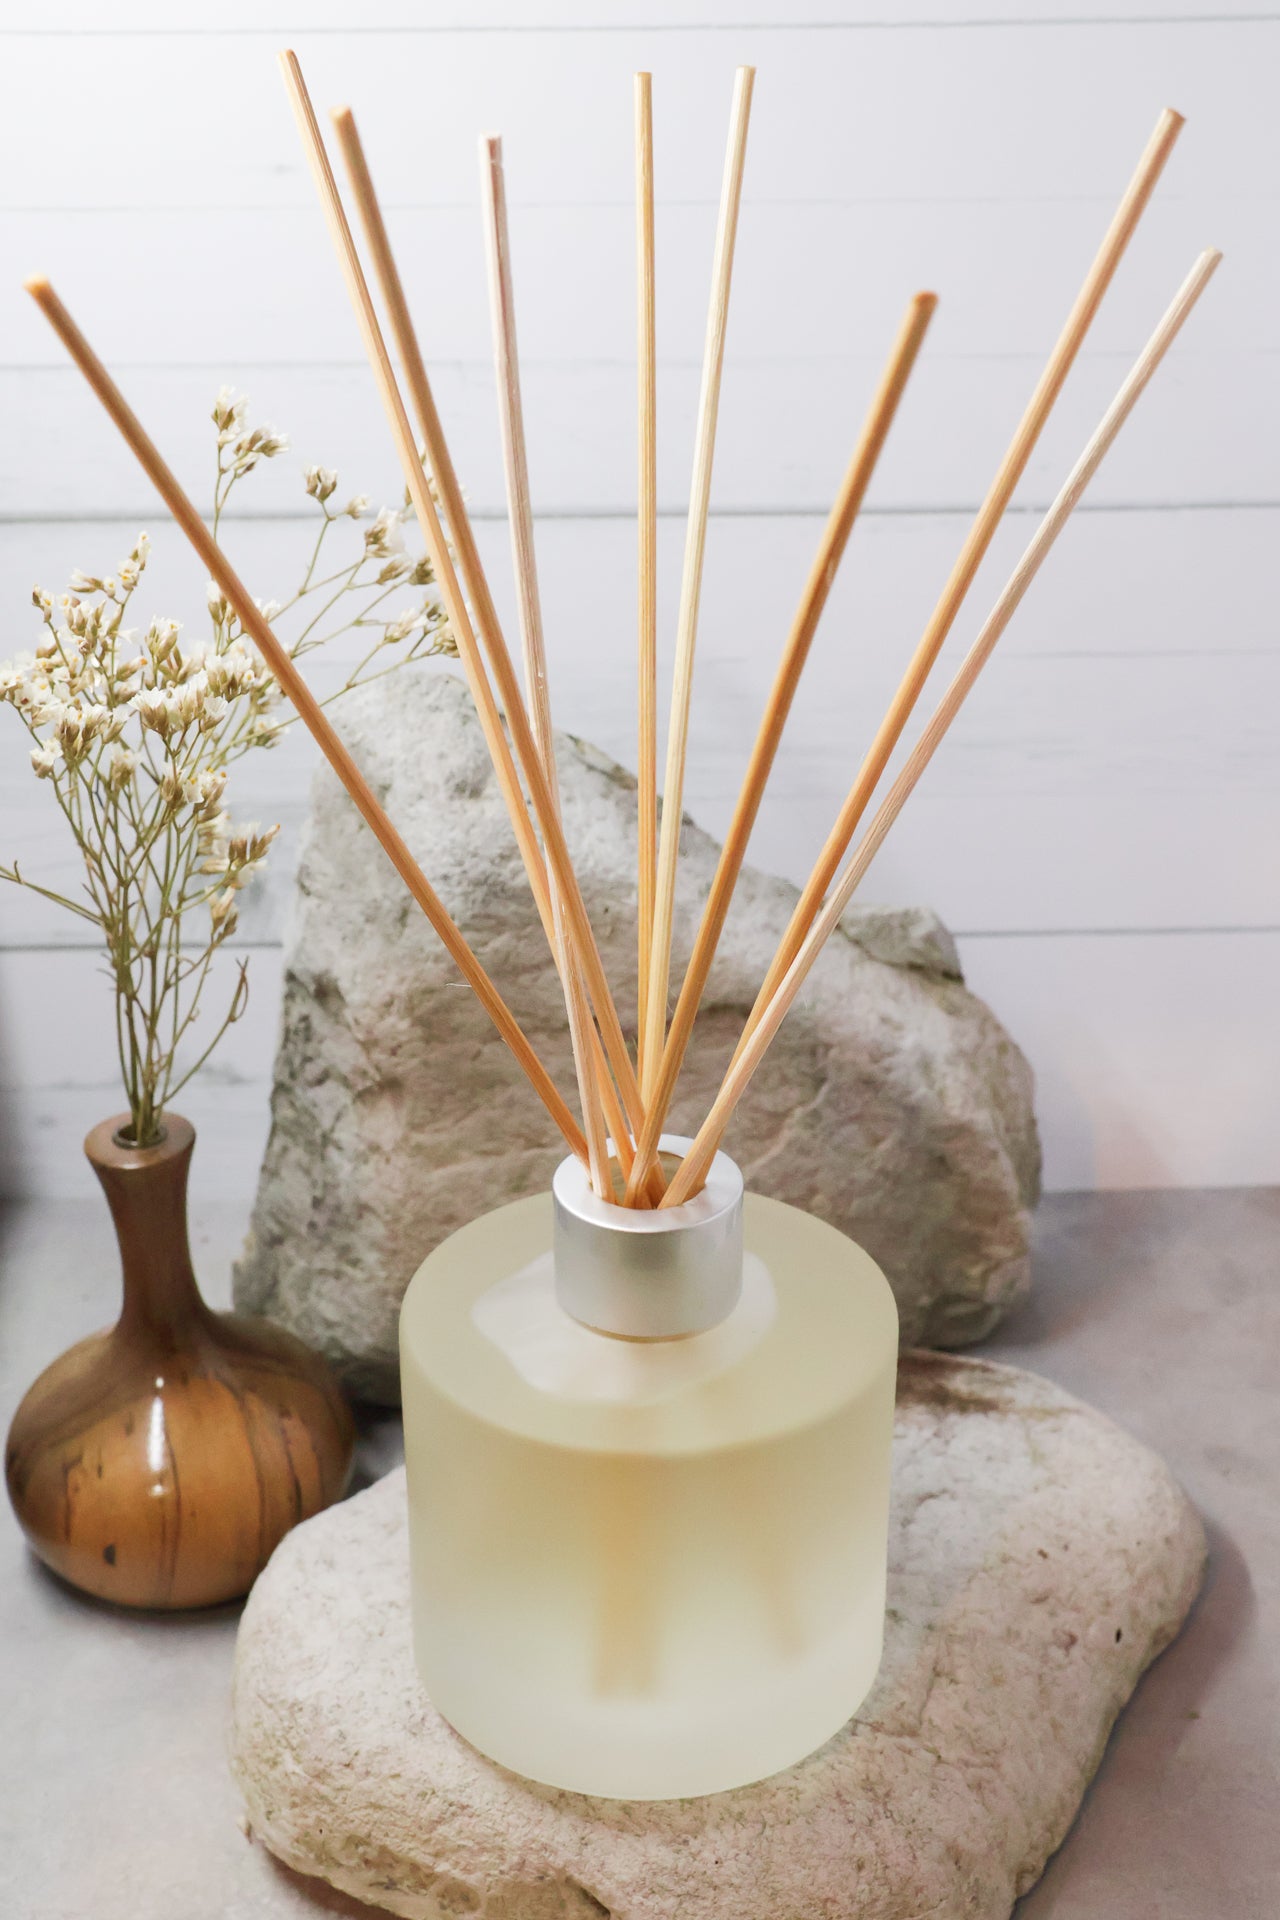 Crystal infused diffuser with wicks with the fragrance Sandalwood, Orchid and Vanilla